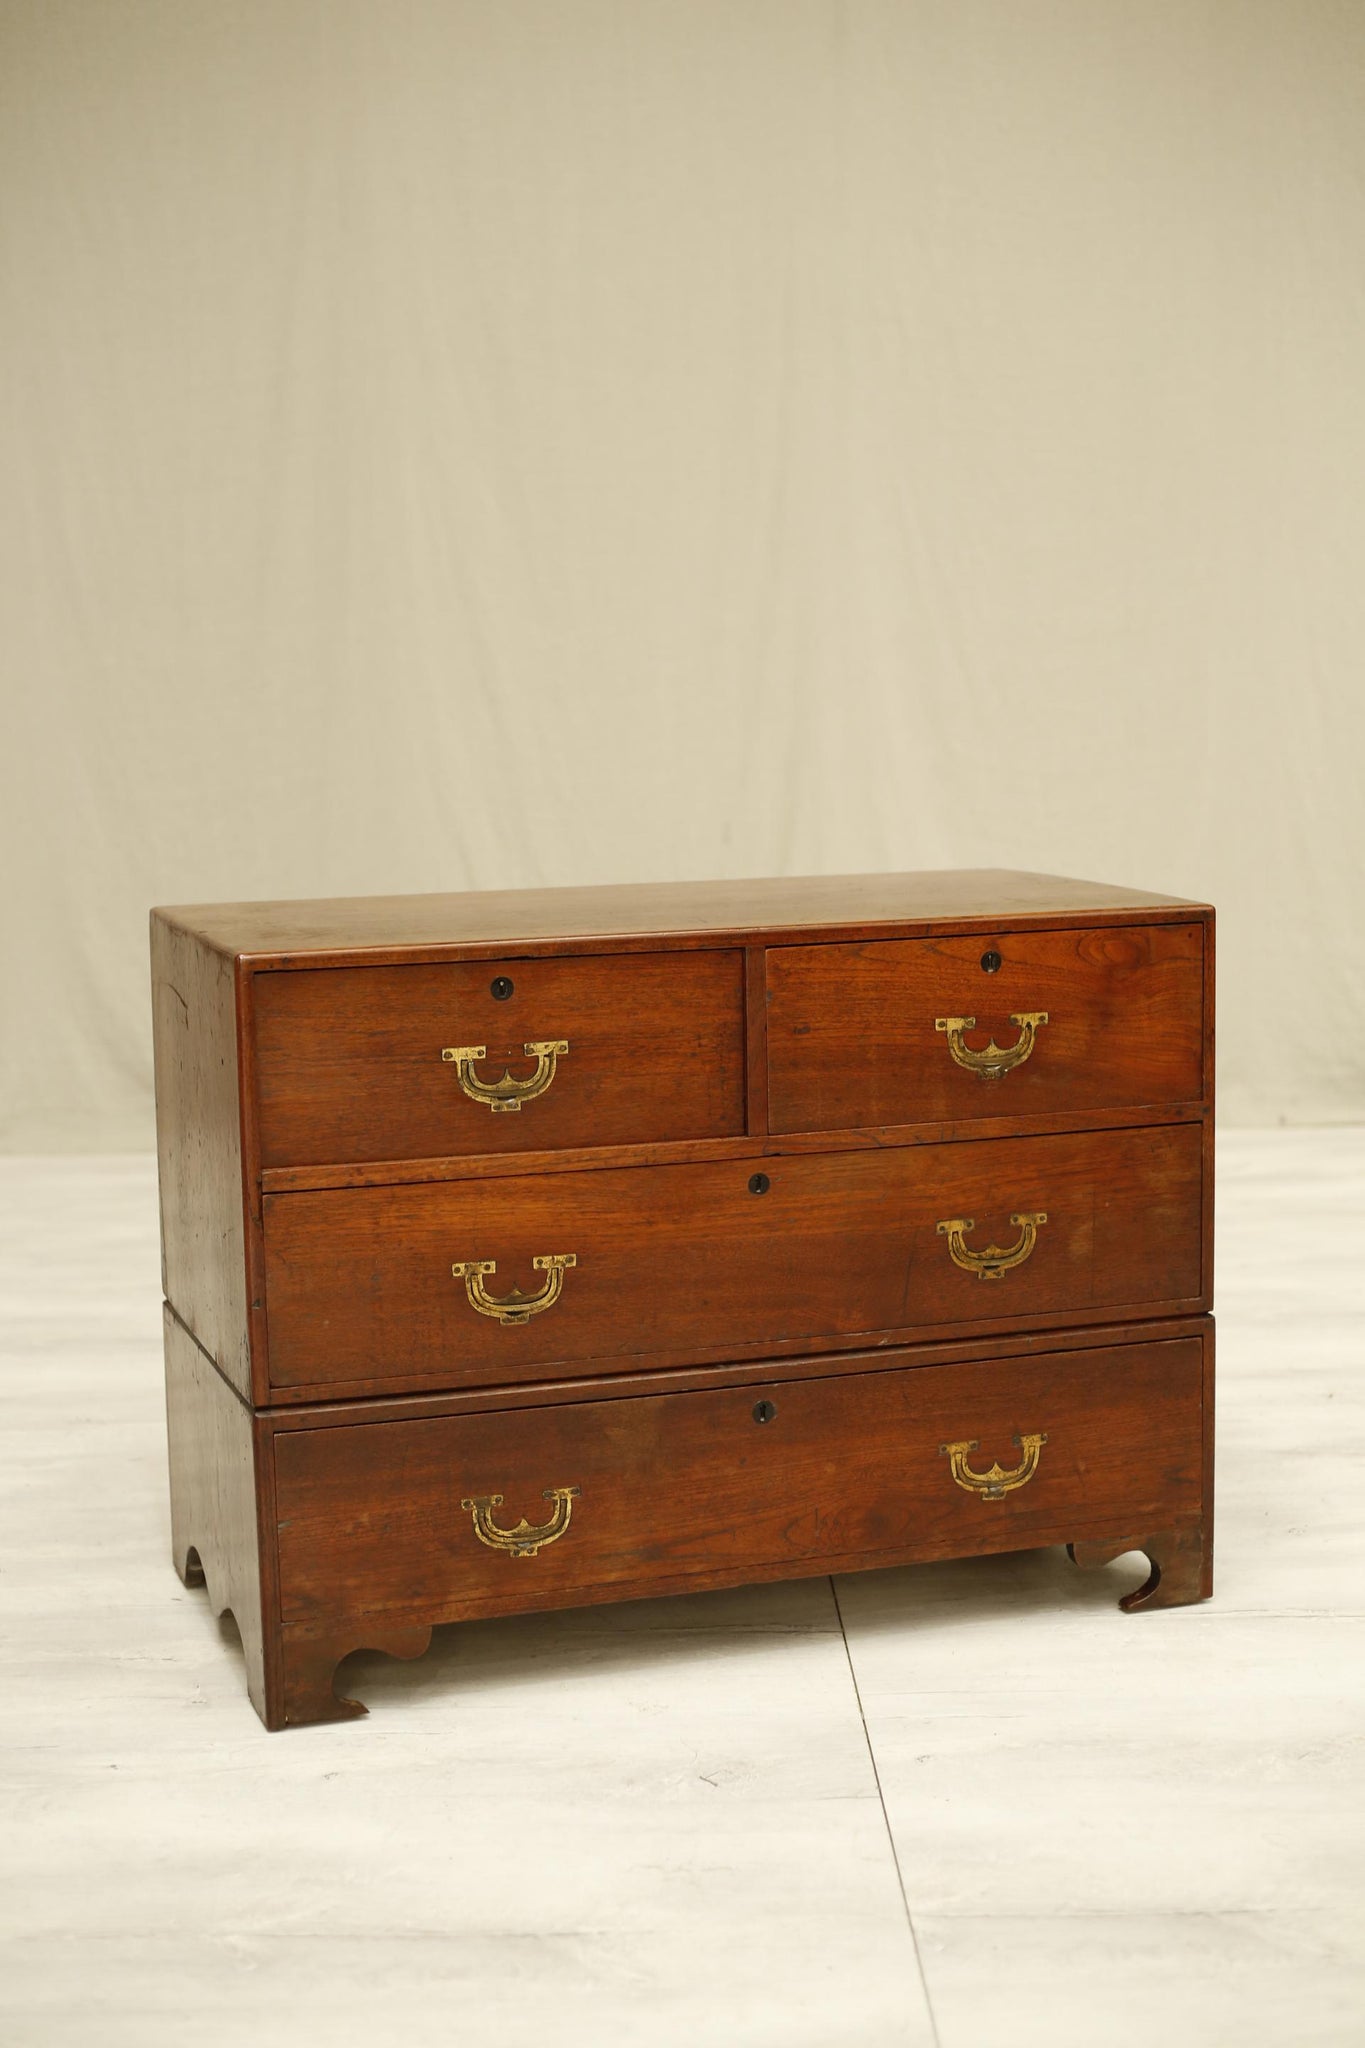 19th century Antique Anglo-Indian teak campaign chest - TallBoy Interiors